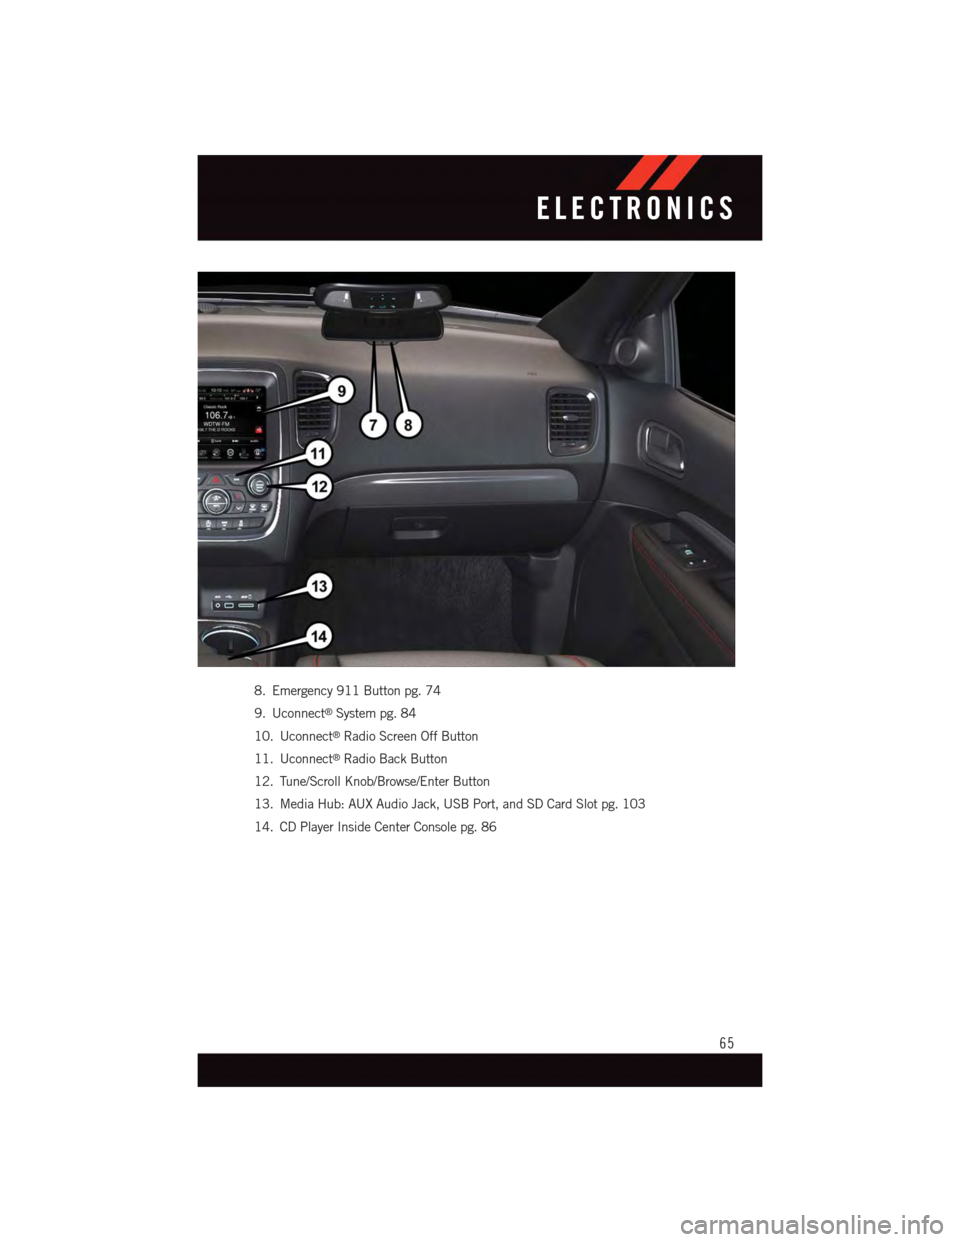 DODGE DURANGO 2015 3.G User Guide 8. Emergency 911 Button pg. 74
9. Uconnect®System pg. 84
10. Uconnect®Radio Screen Off Button
11. Uconnect®Radio Back Button
12. Tune/Scroll Knob/Browse/Enter Button
13. Media Hub: AUX Audio Jack, 